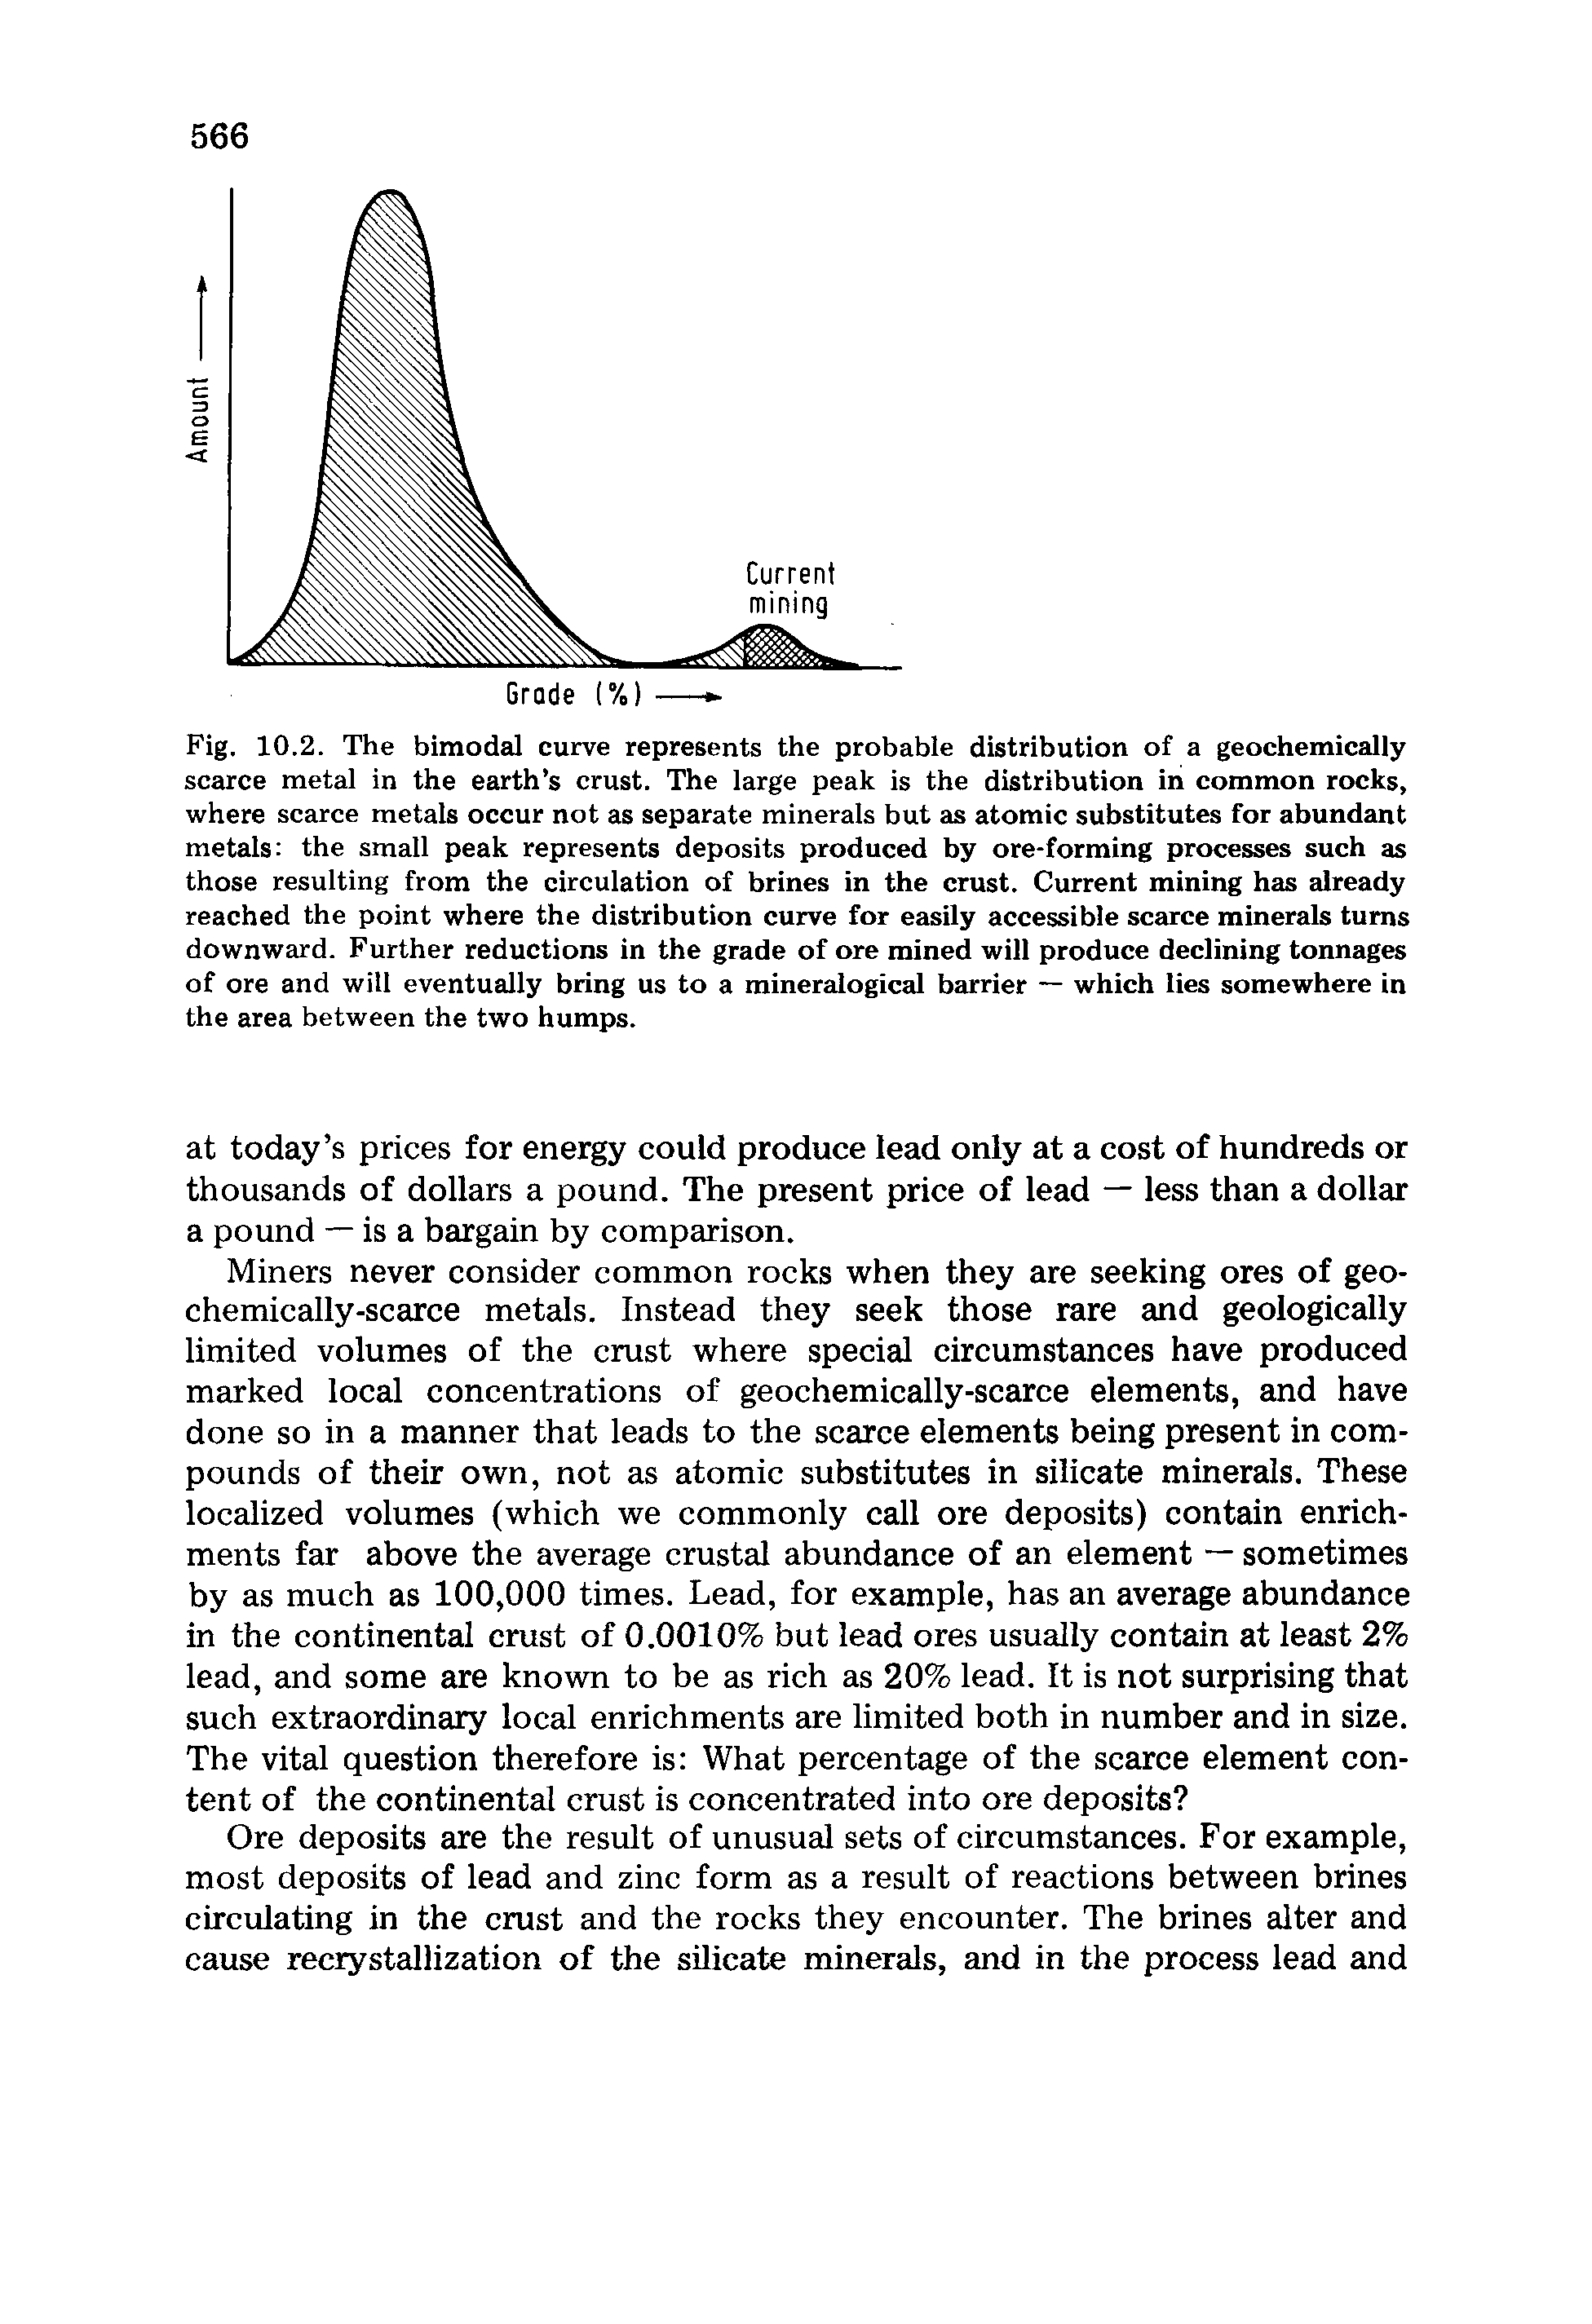 Fig. 10.2. The bimodal curve represents the probable distribution of a geochemically scarce metal in the earth s crust. The large peak is the distribution in common rocks, where scarce metals occur not as separate minerals but as atomic substitutes for abundant metals the small peak represents deposits produced by ore-forming processes such as those resulting from the circulation of brines in the crust. Current mining has already reached the point where the distribution curve for easily accessible scarce minerals turns downward. Further reductions in the grade of ore mined will produce declining tonnages of ore and will eventually bring us to a mineralogical barrier — which lies somewhere in the area between the two humps.